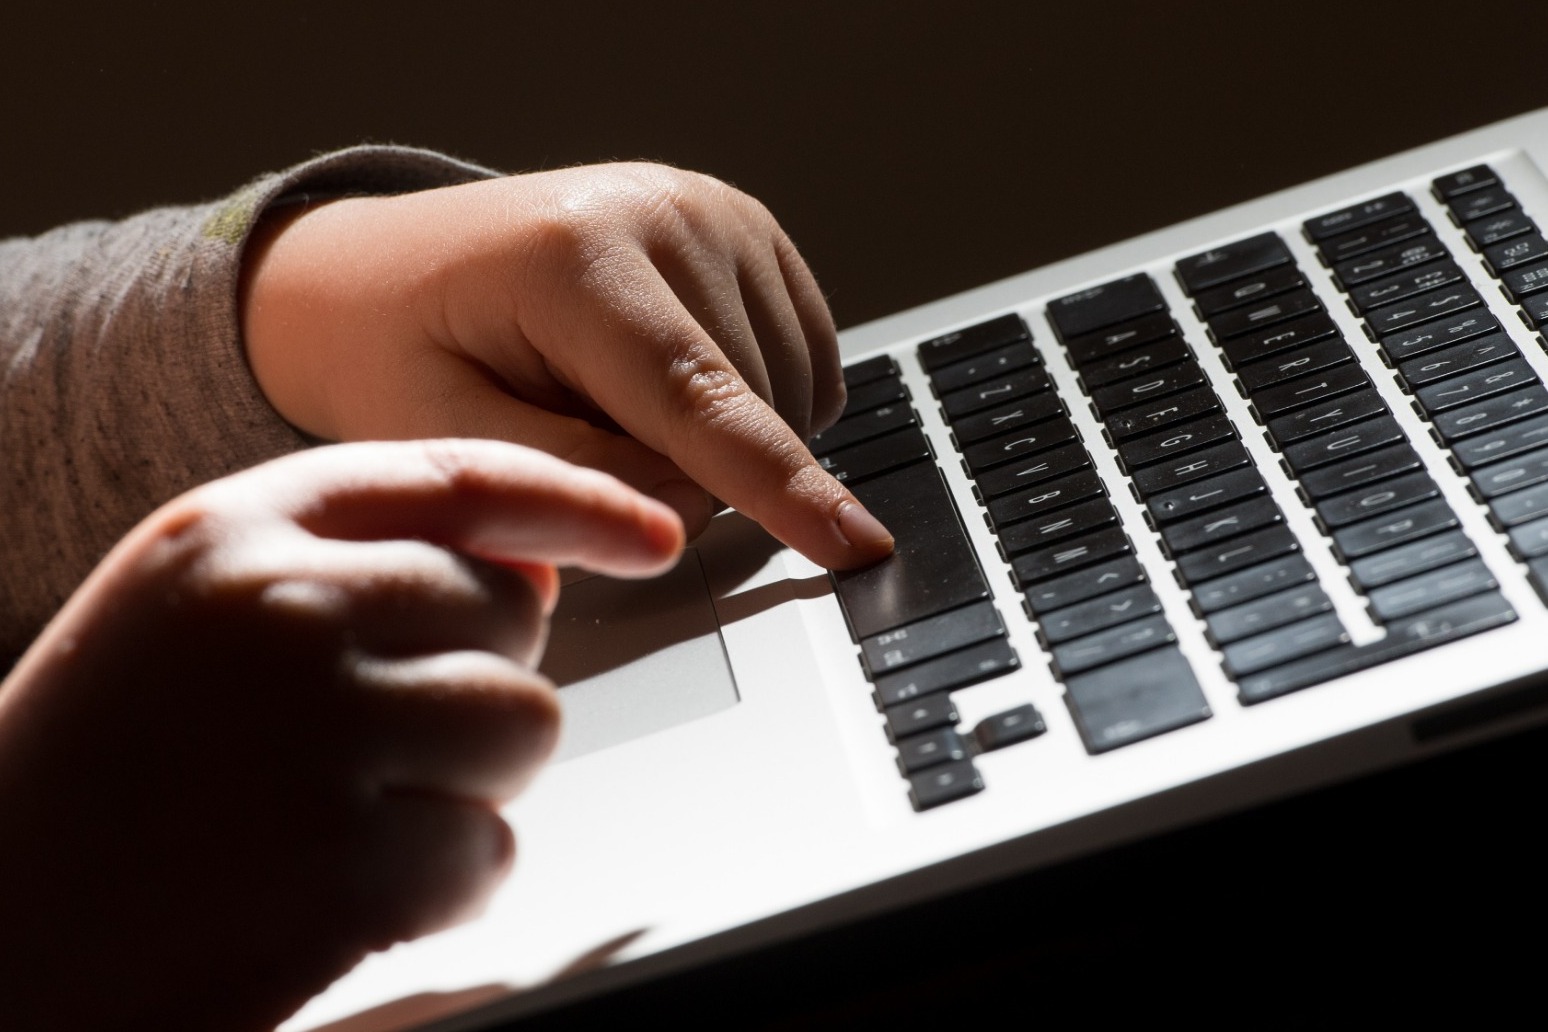 Children being coerced into most severe forms of sexual abuse online 